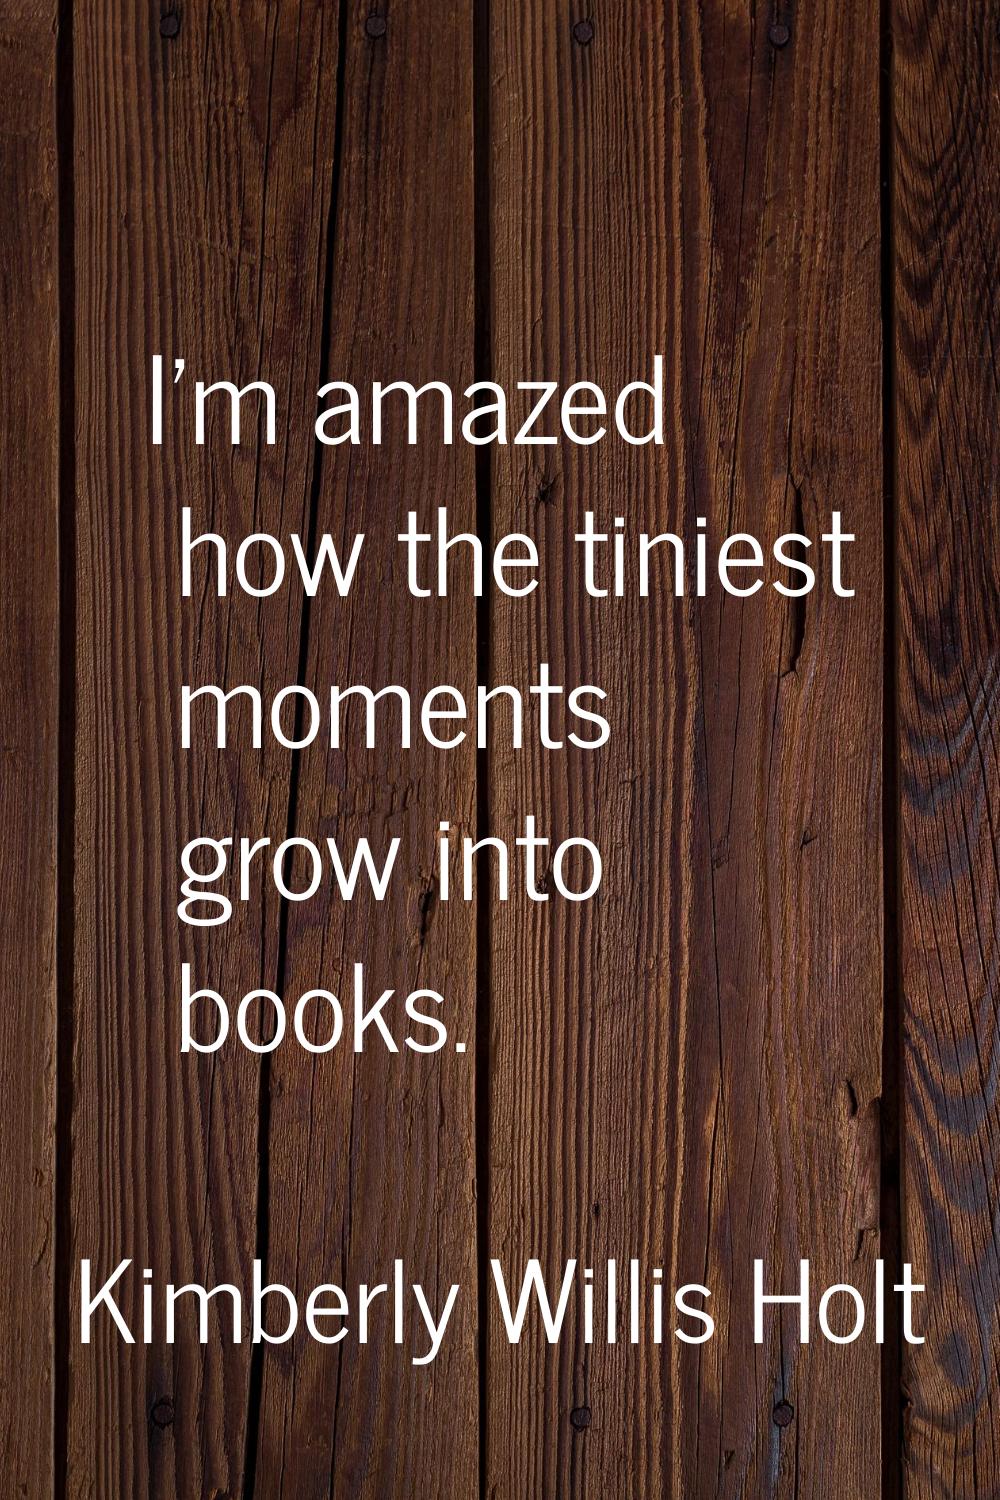 I'm amazed how the tiniest moments grow into books.